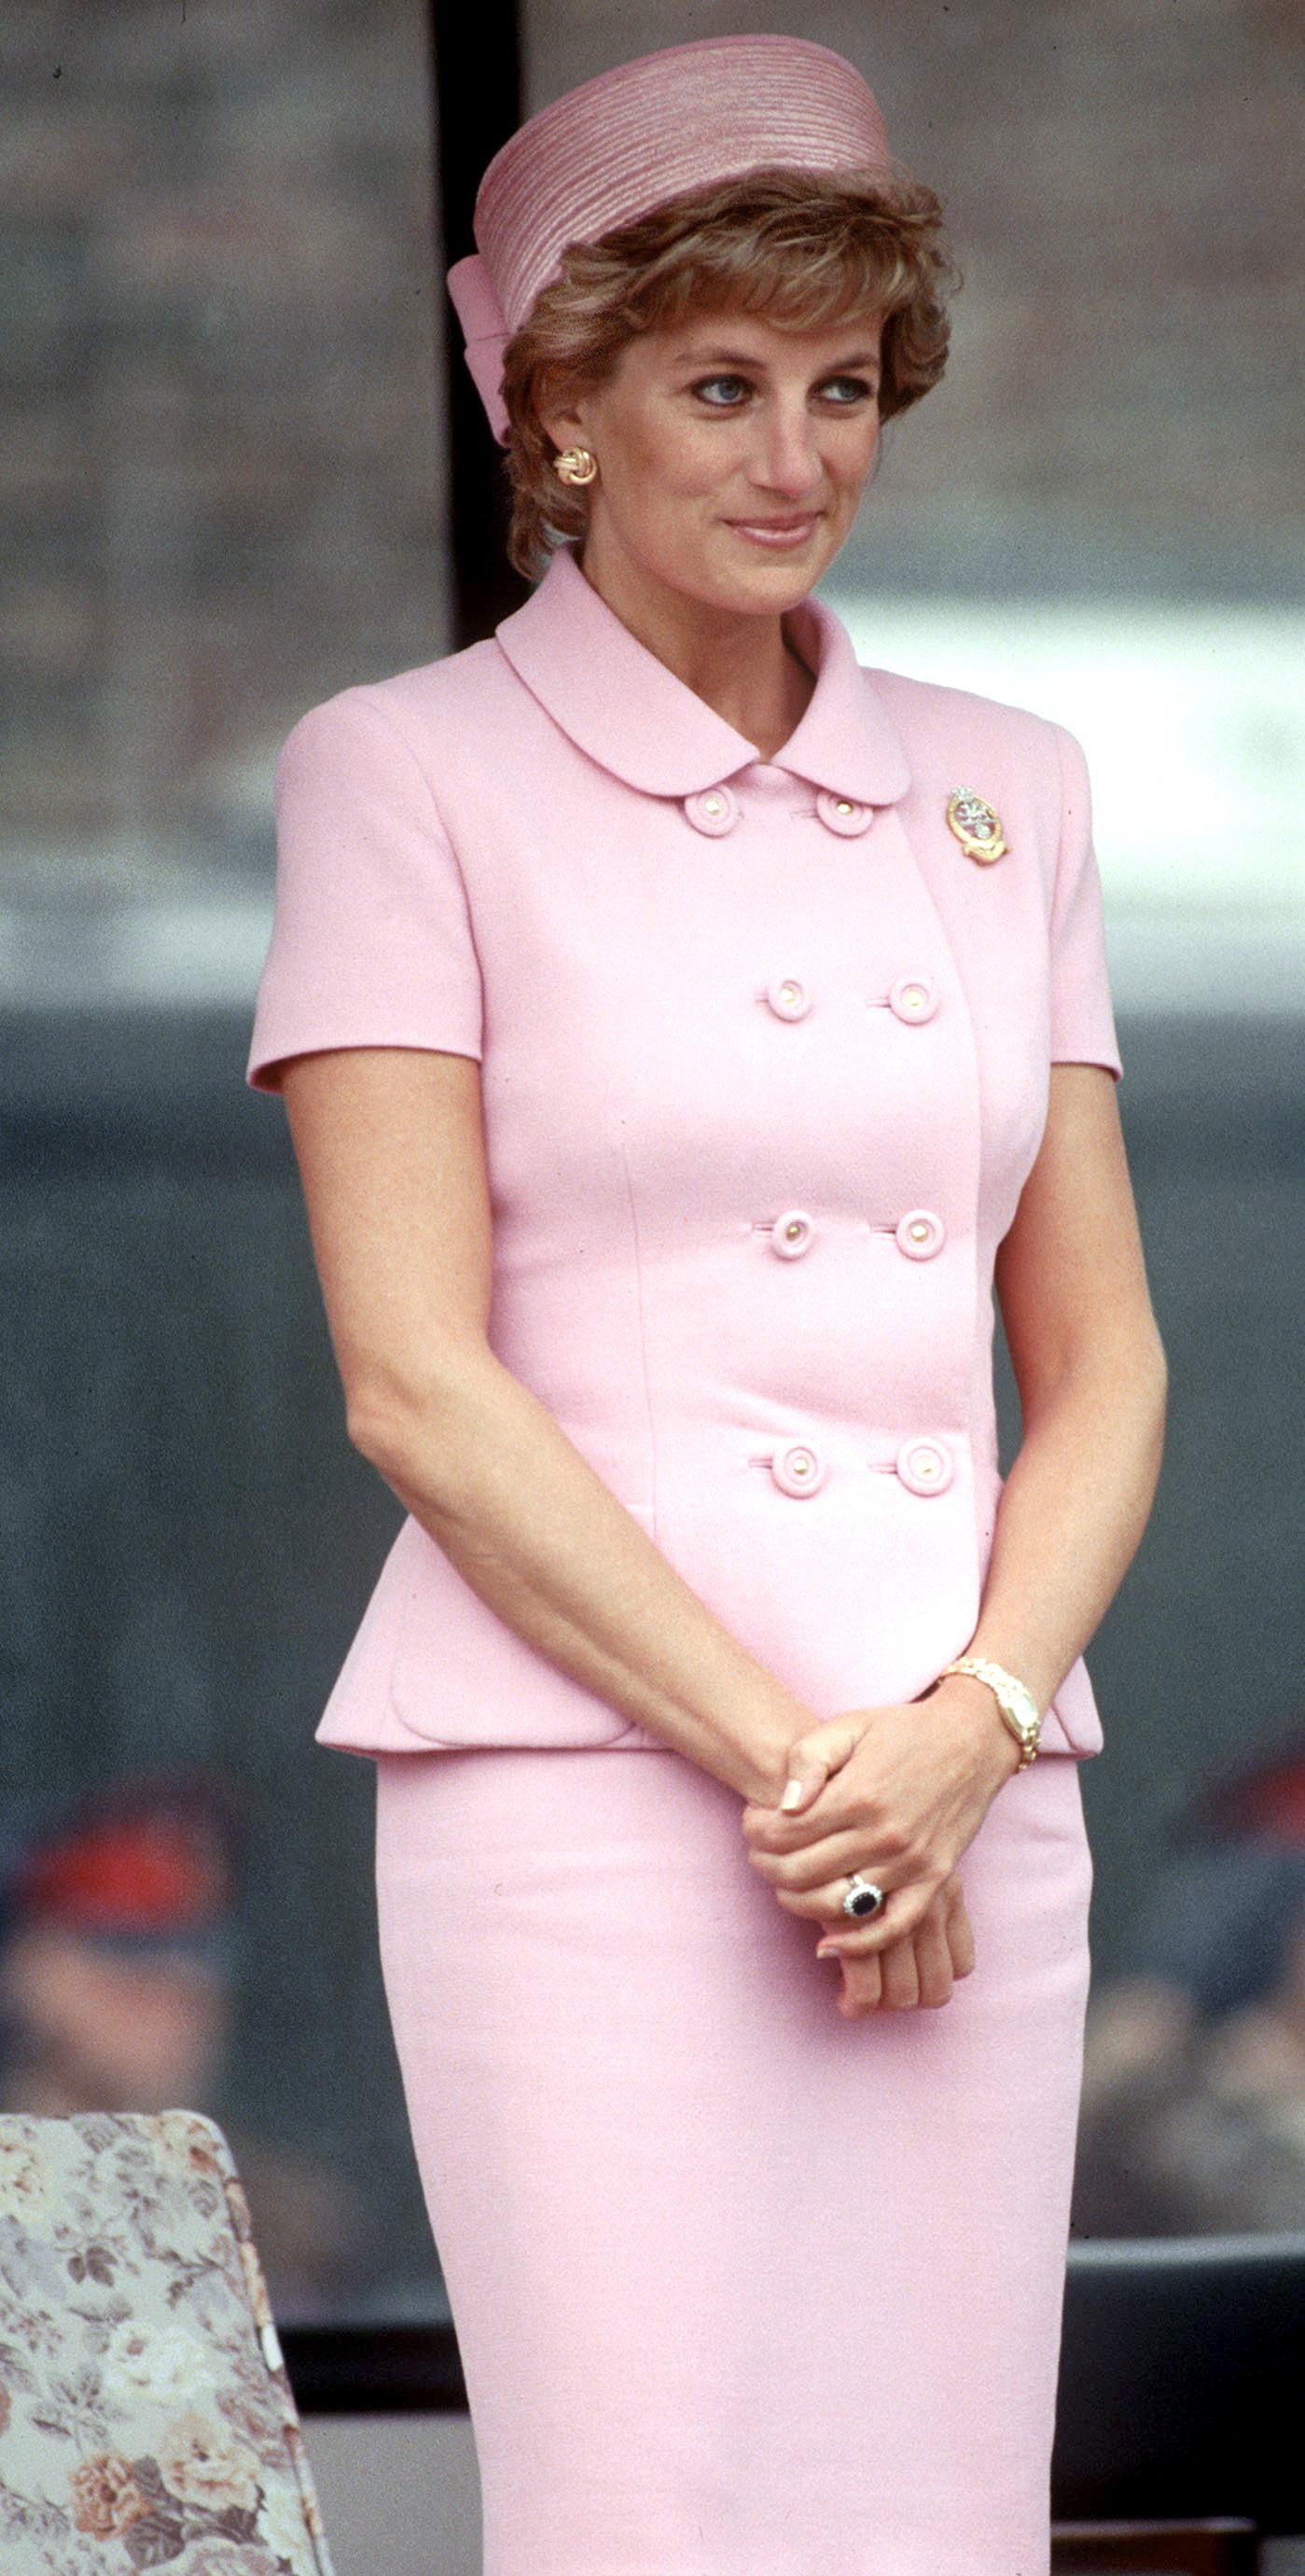 UNITED KINGDOM - MAY 20:  Princess Diana Wearing A Suit By Fashion Designers Versace For A Visit To A Regiment  (Photo by Tim Graham Photo Library via Getty Images) (Foto: Tim Graham Photo Library via Get)